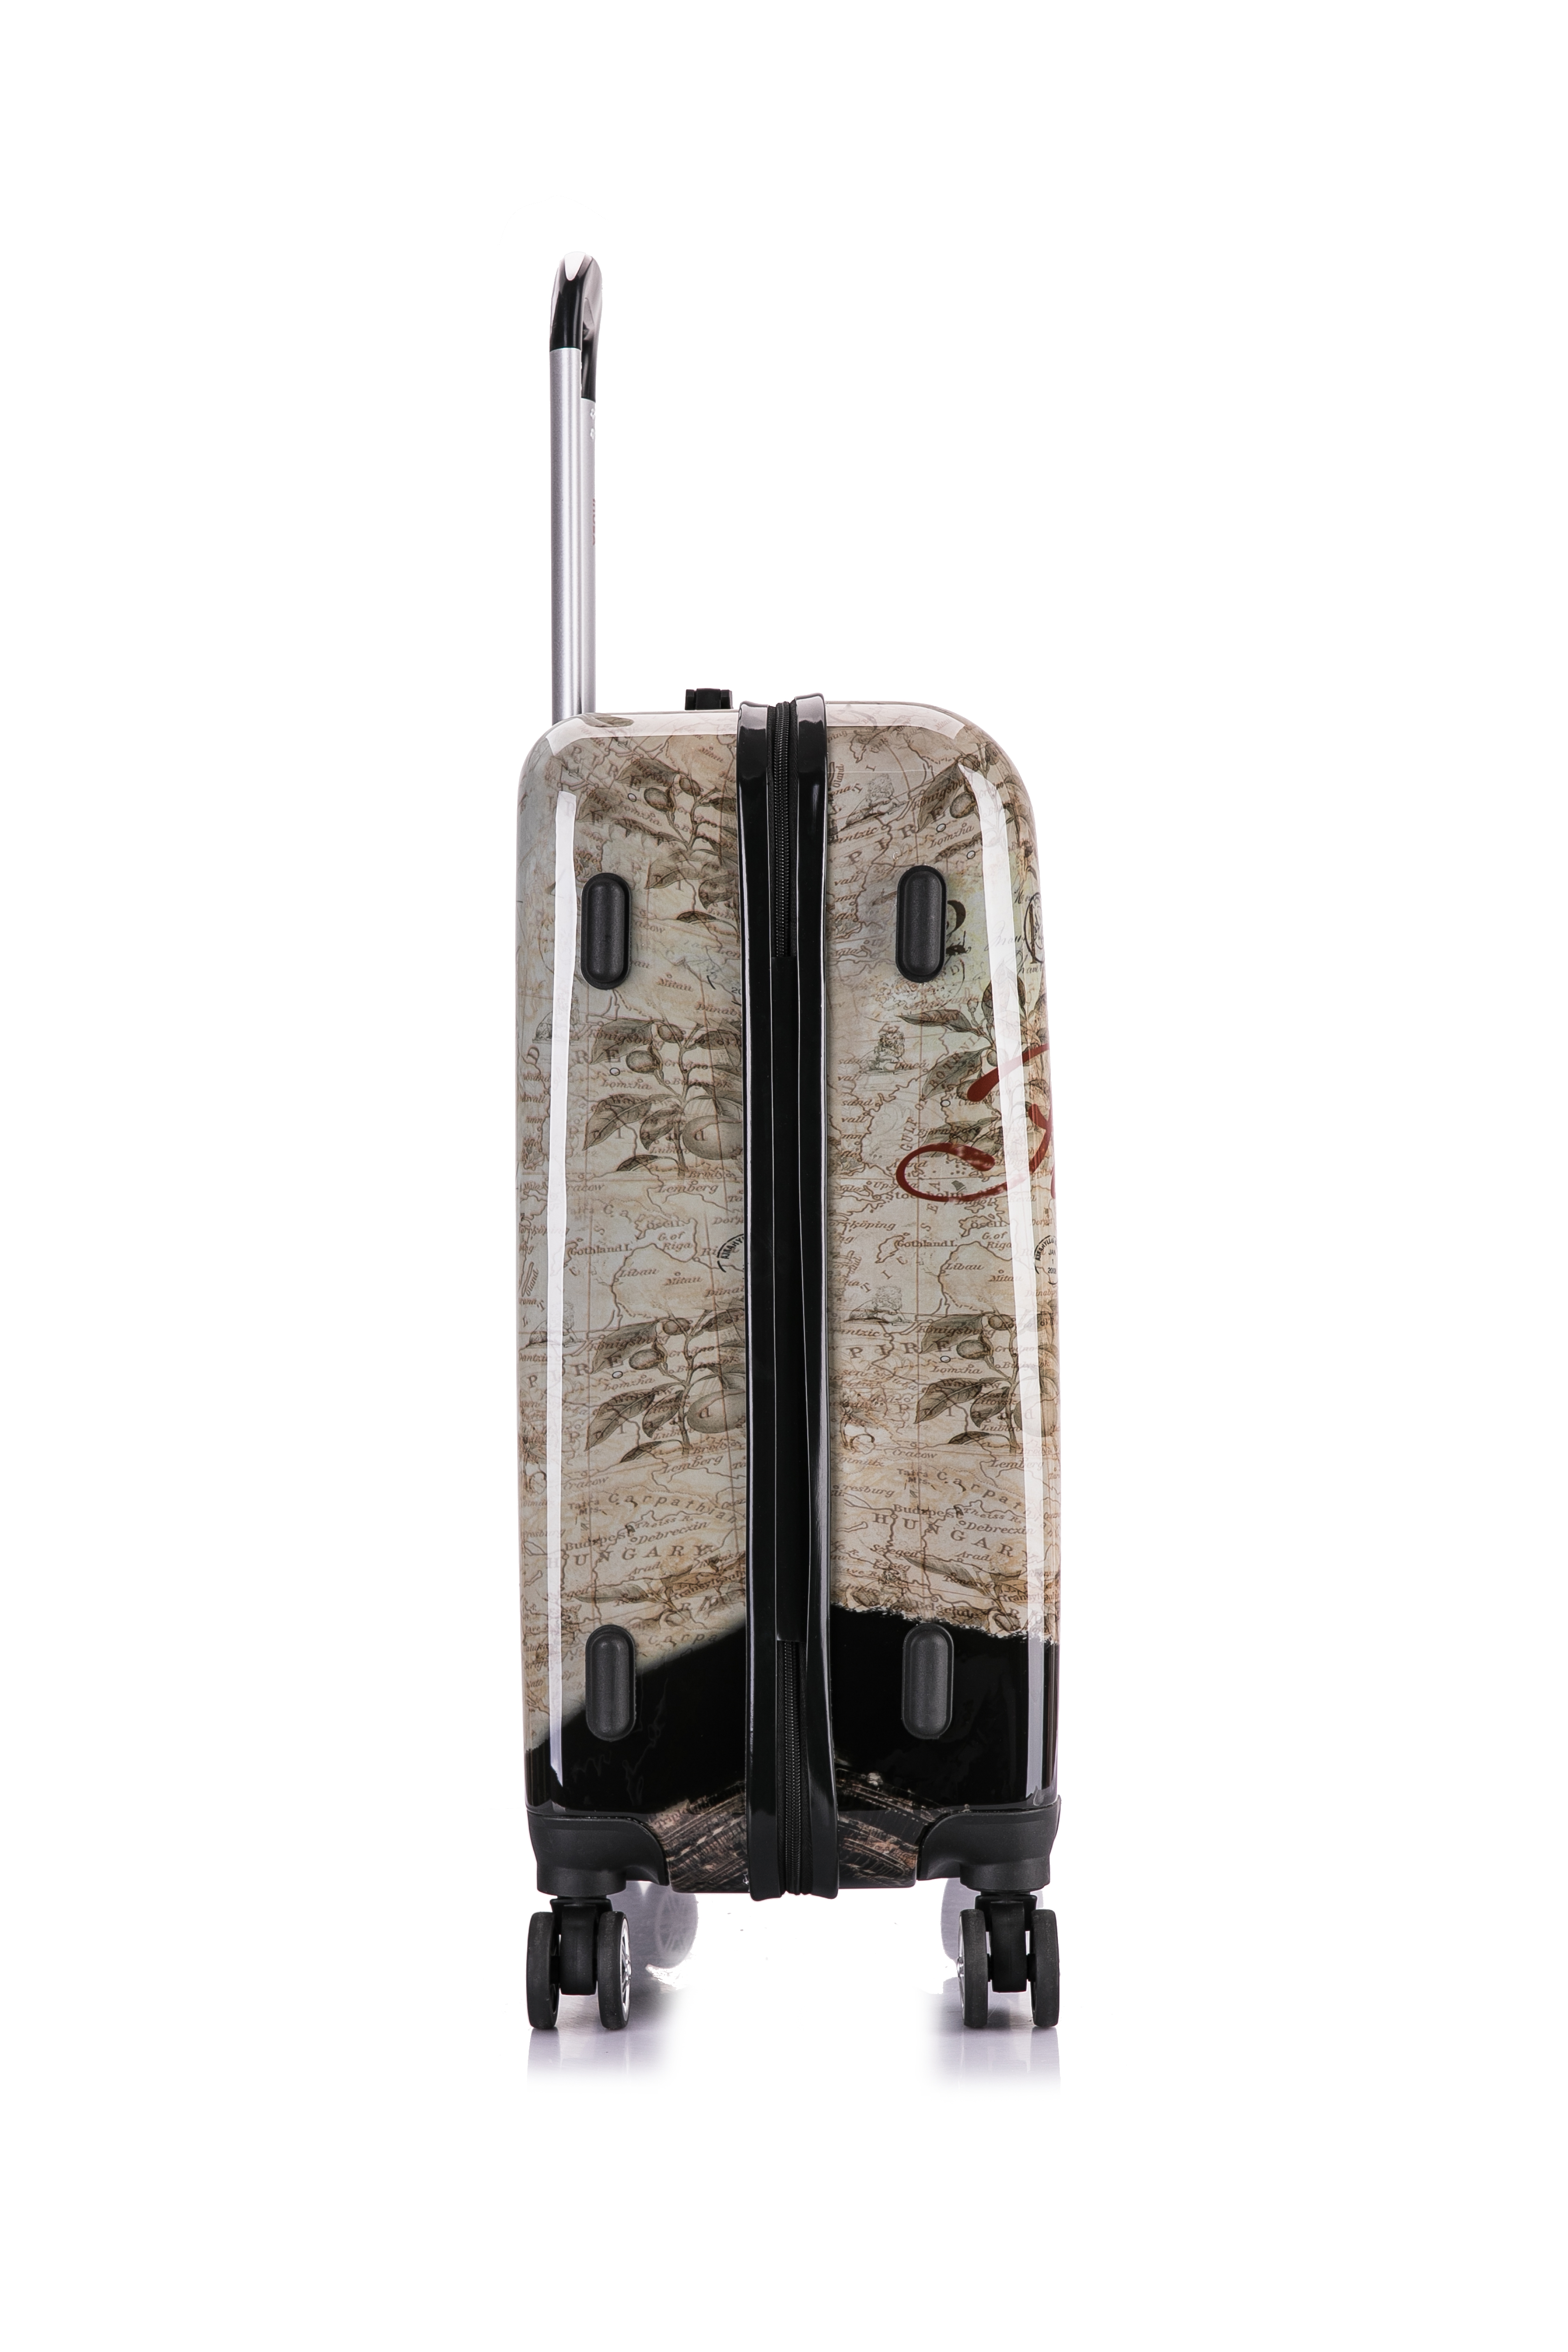 InUSA Print 24" Hardside Checked Luggage with Spinner Wheels, Handle and Trolley, Paris - image 5 of 15